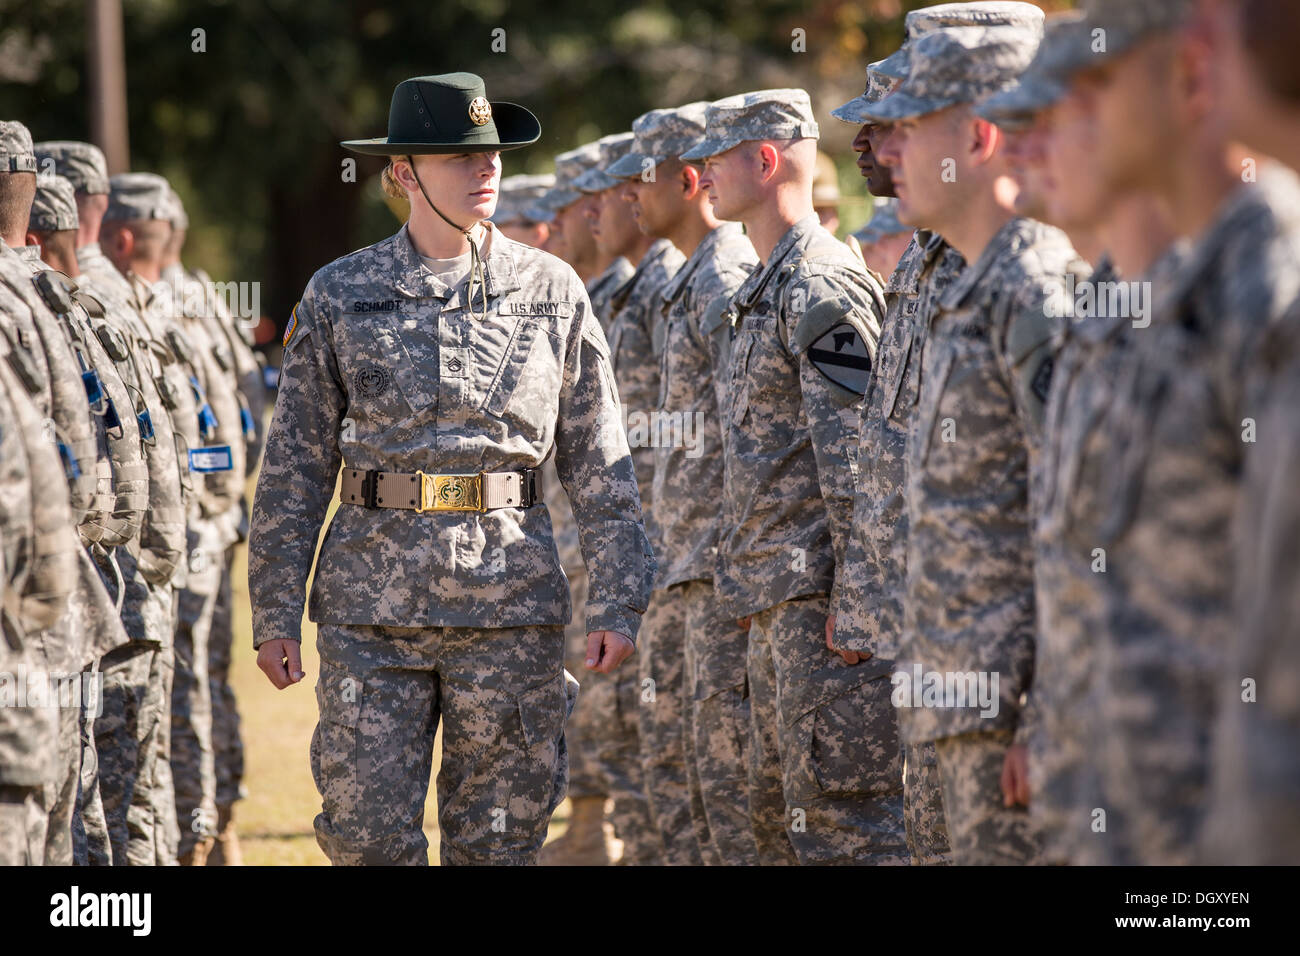 A female Drill Sergeant instructor observes candidates at the US Army Drill Instructors School Fort Jackson during close order drill exercises September 27, 2013 in Columbia, SC. While 14 percent of the Army is women soldiers there is a shortage of female Drill Sergeants. Stock Photo